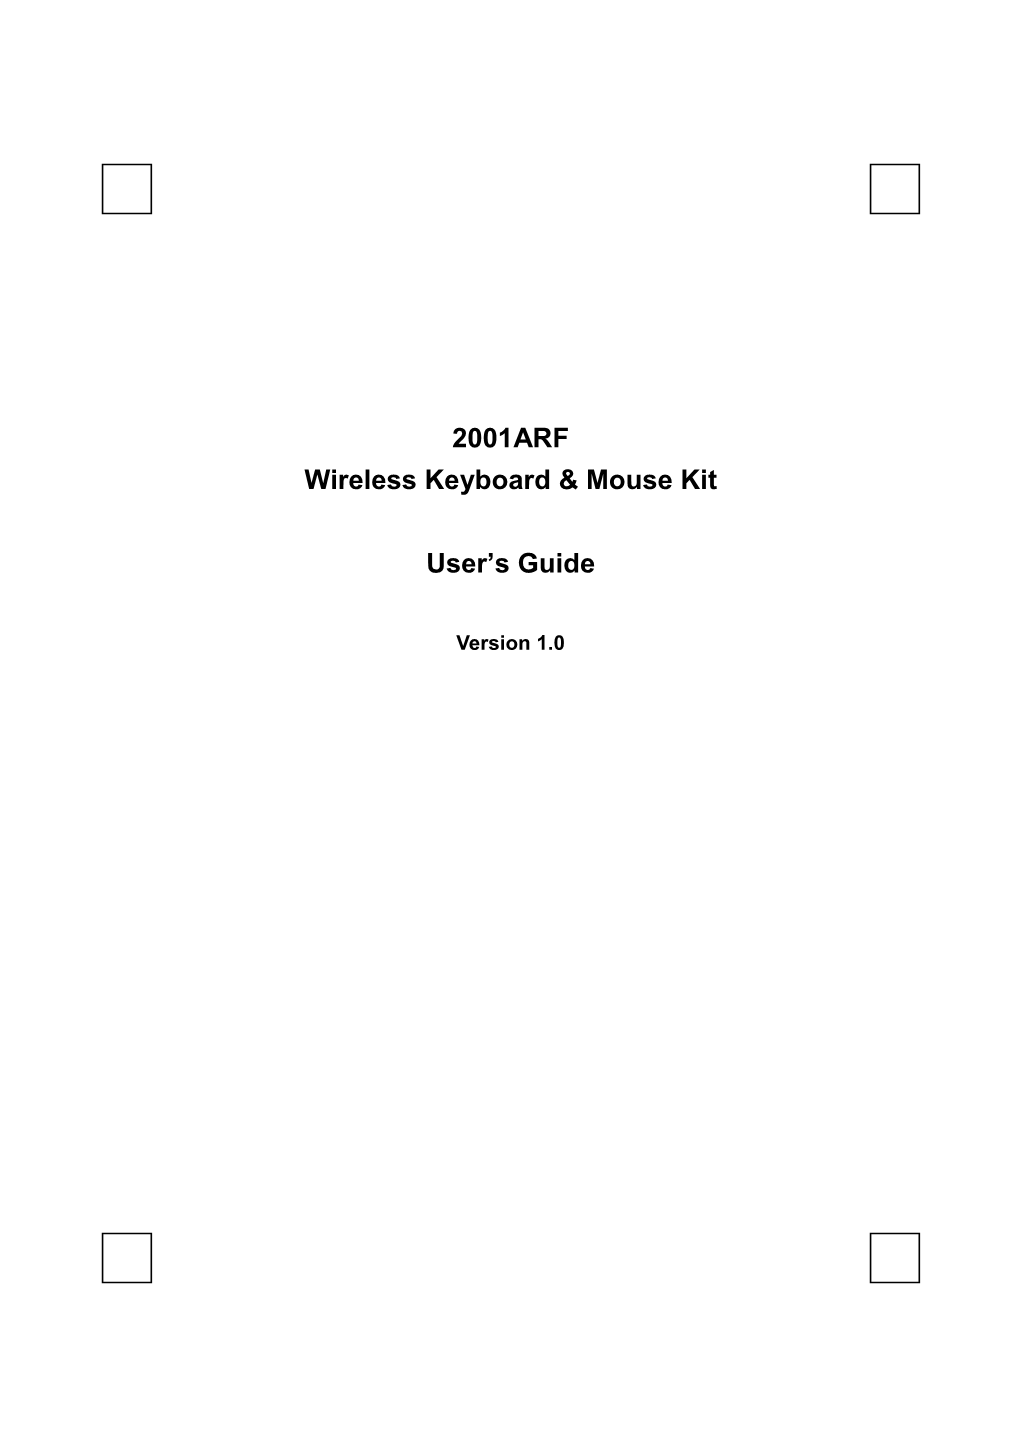 2001ARF Wireless Keyboard & Mouse Kit User's Guide